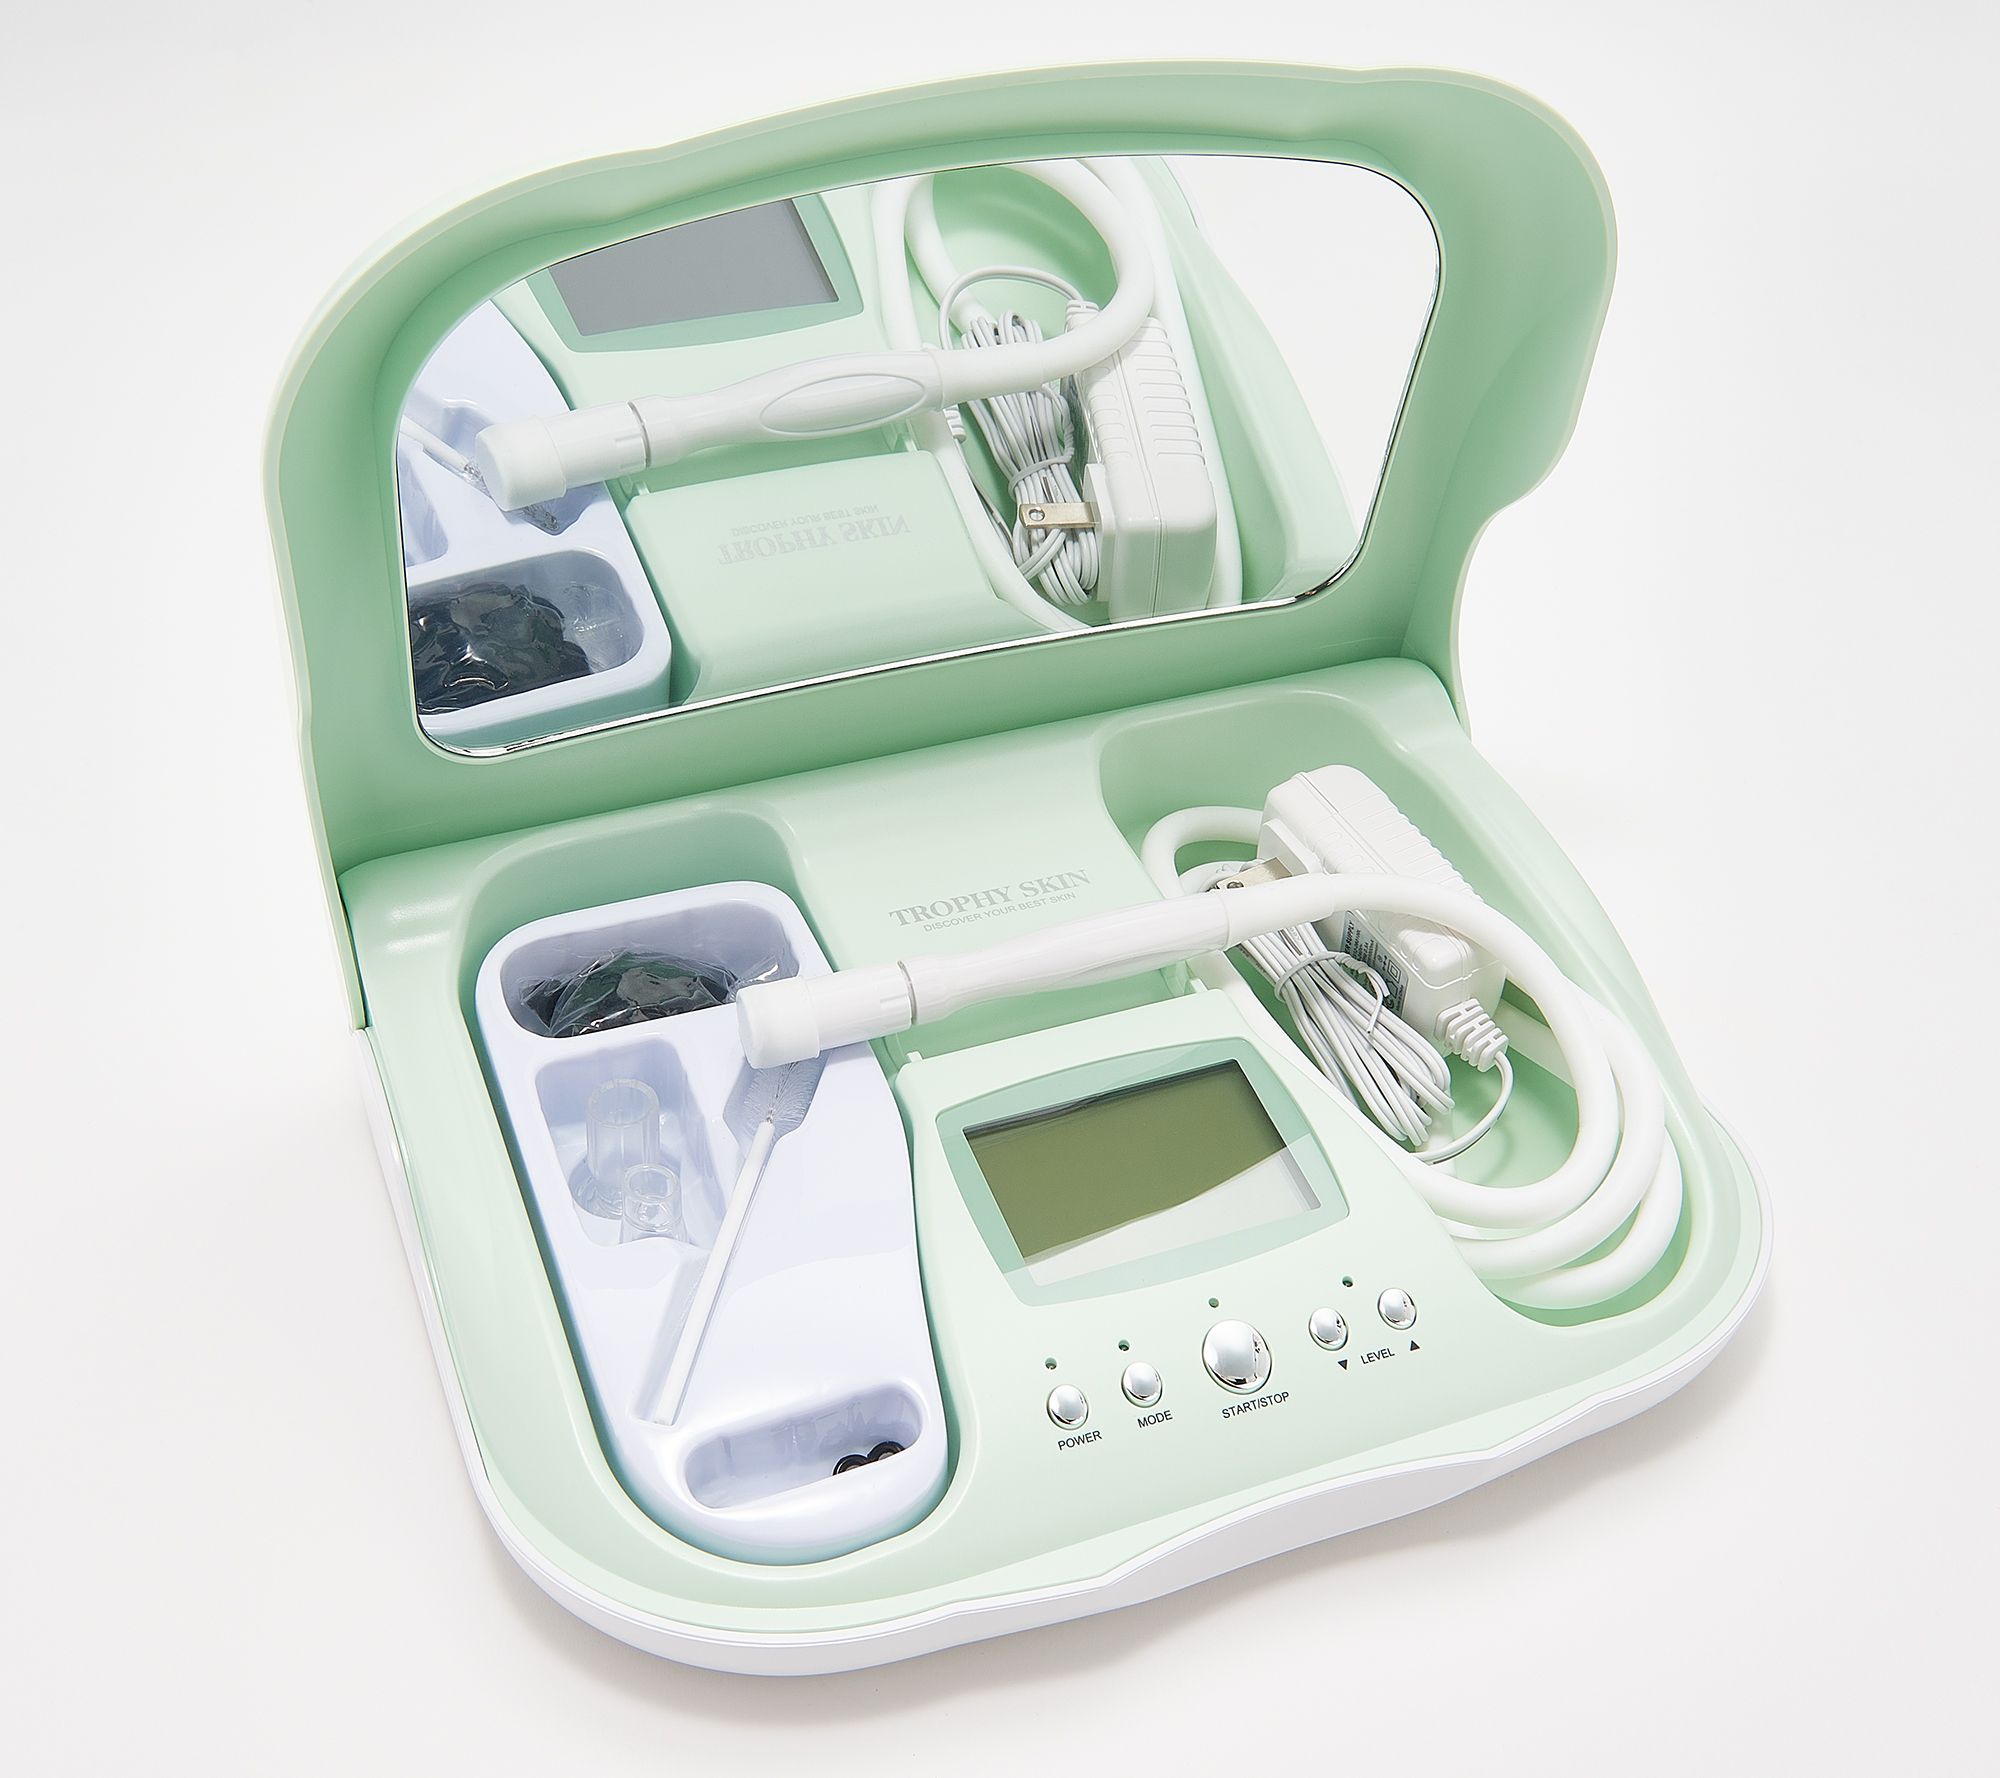 Trophy Skin Microdermabrasion System - health and beauty - by owner -  household sale - craigslist